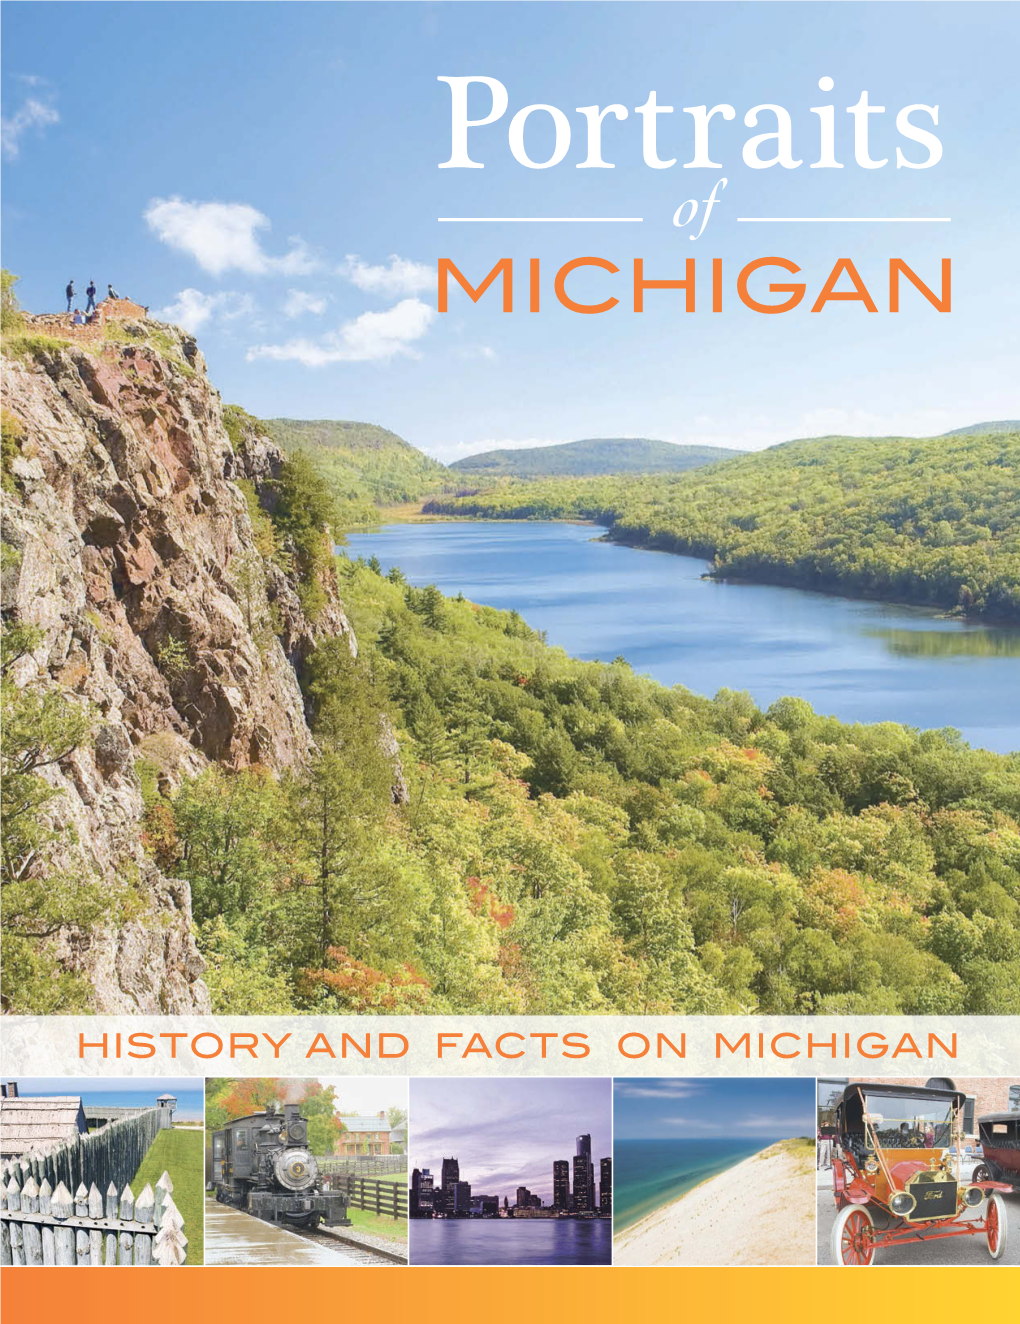 Portraits of Michigan Offers a Fun Way for You to Learn About the State in Which You Live